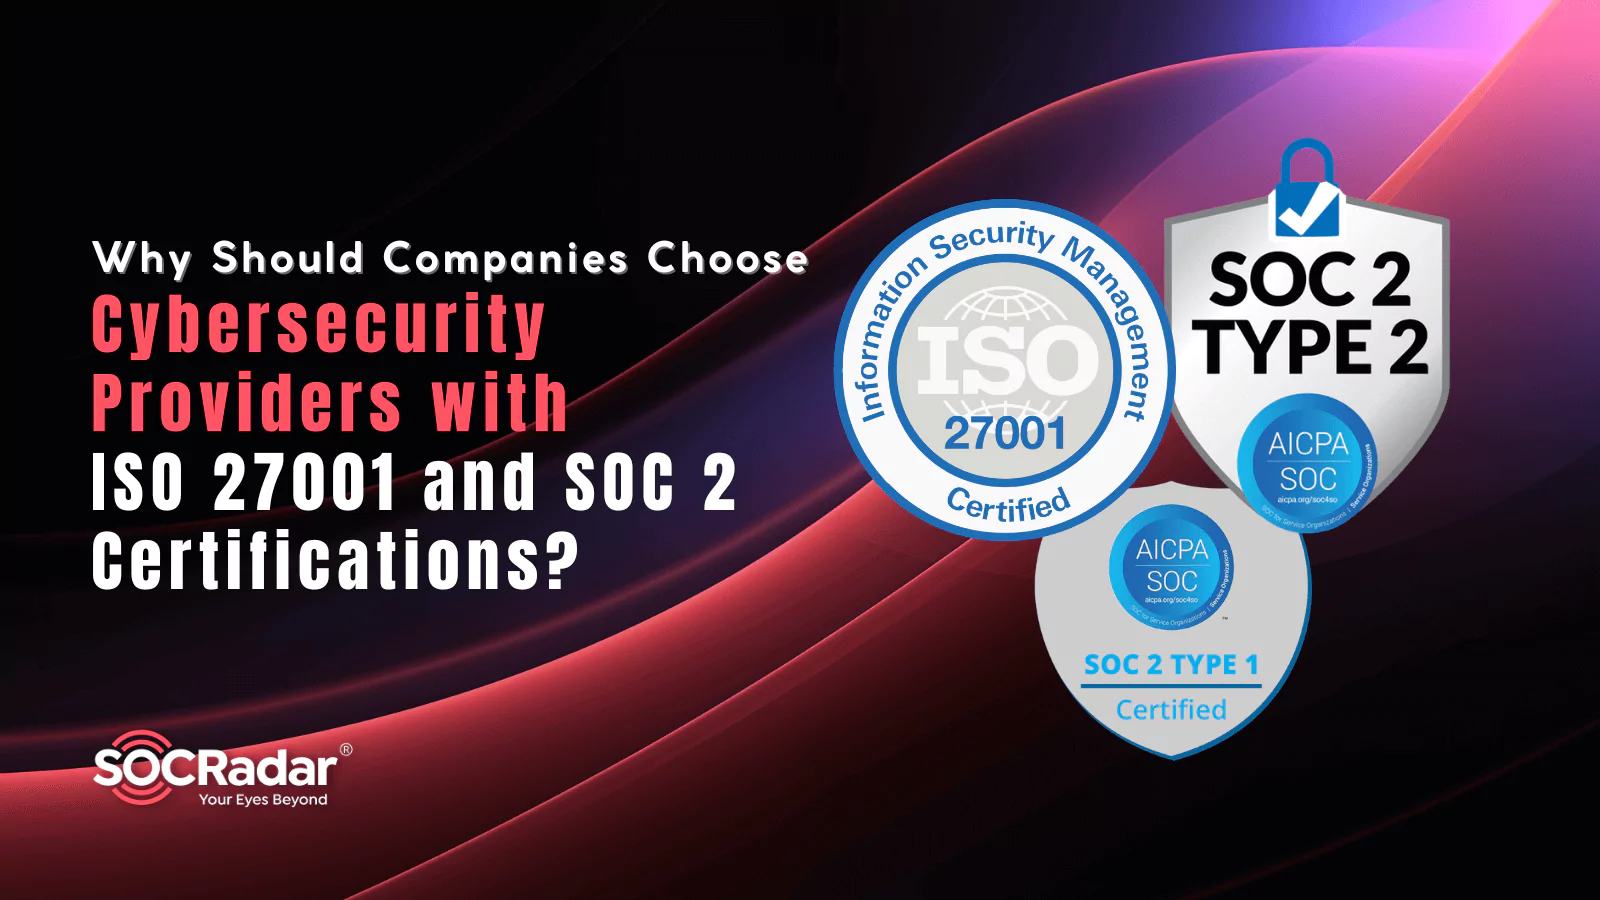 SOCRadar® Cyber Intelligence Inc. | Why Should Companies Choose Cybersecurity Providers with ISO 27001 and SOC 2 Certifications?